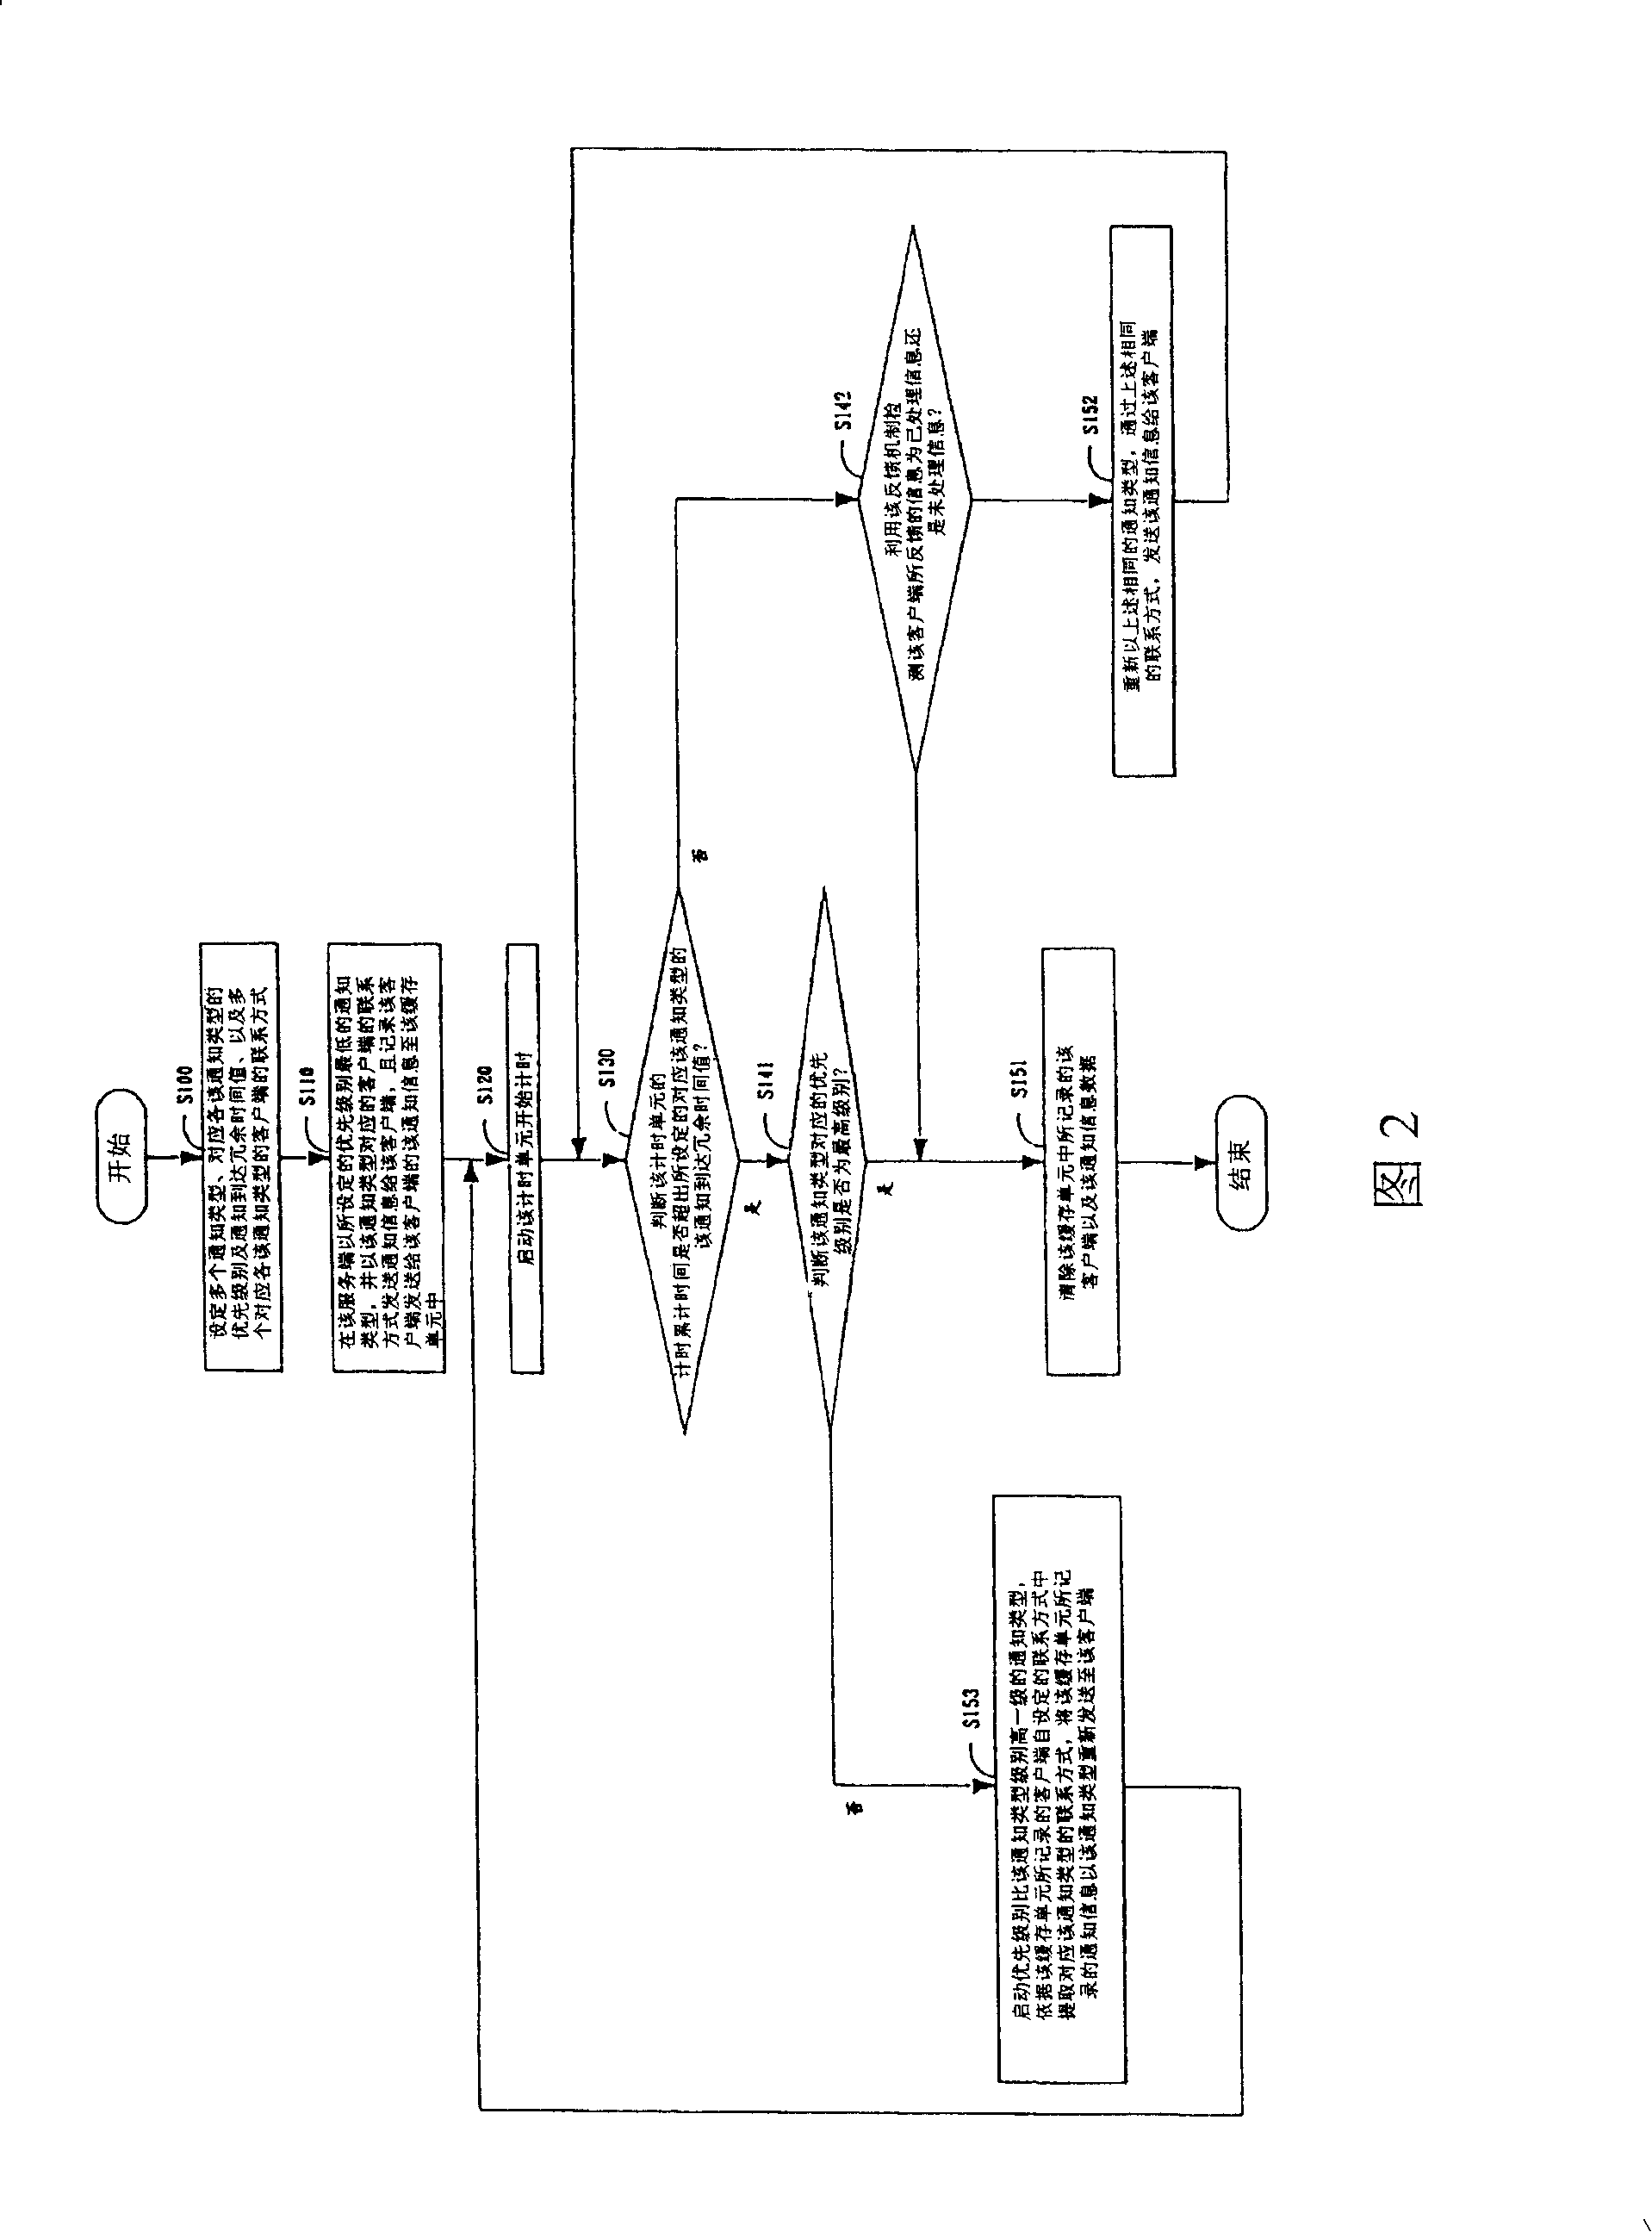 Method for conveying information